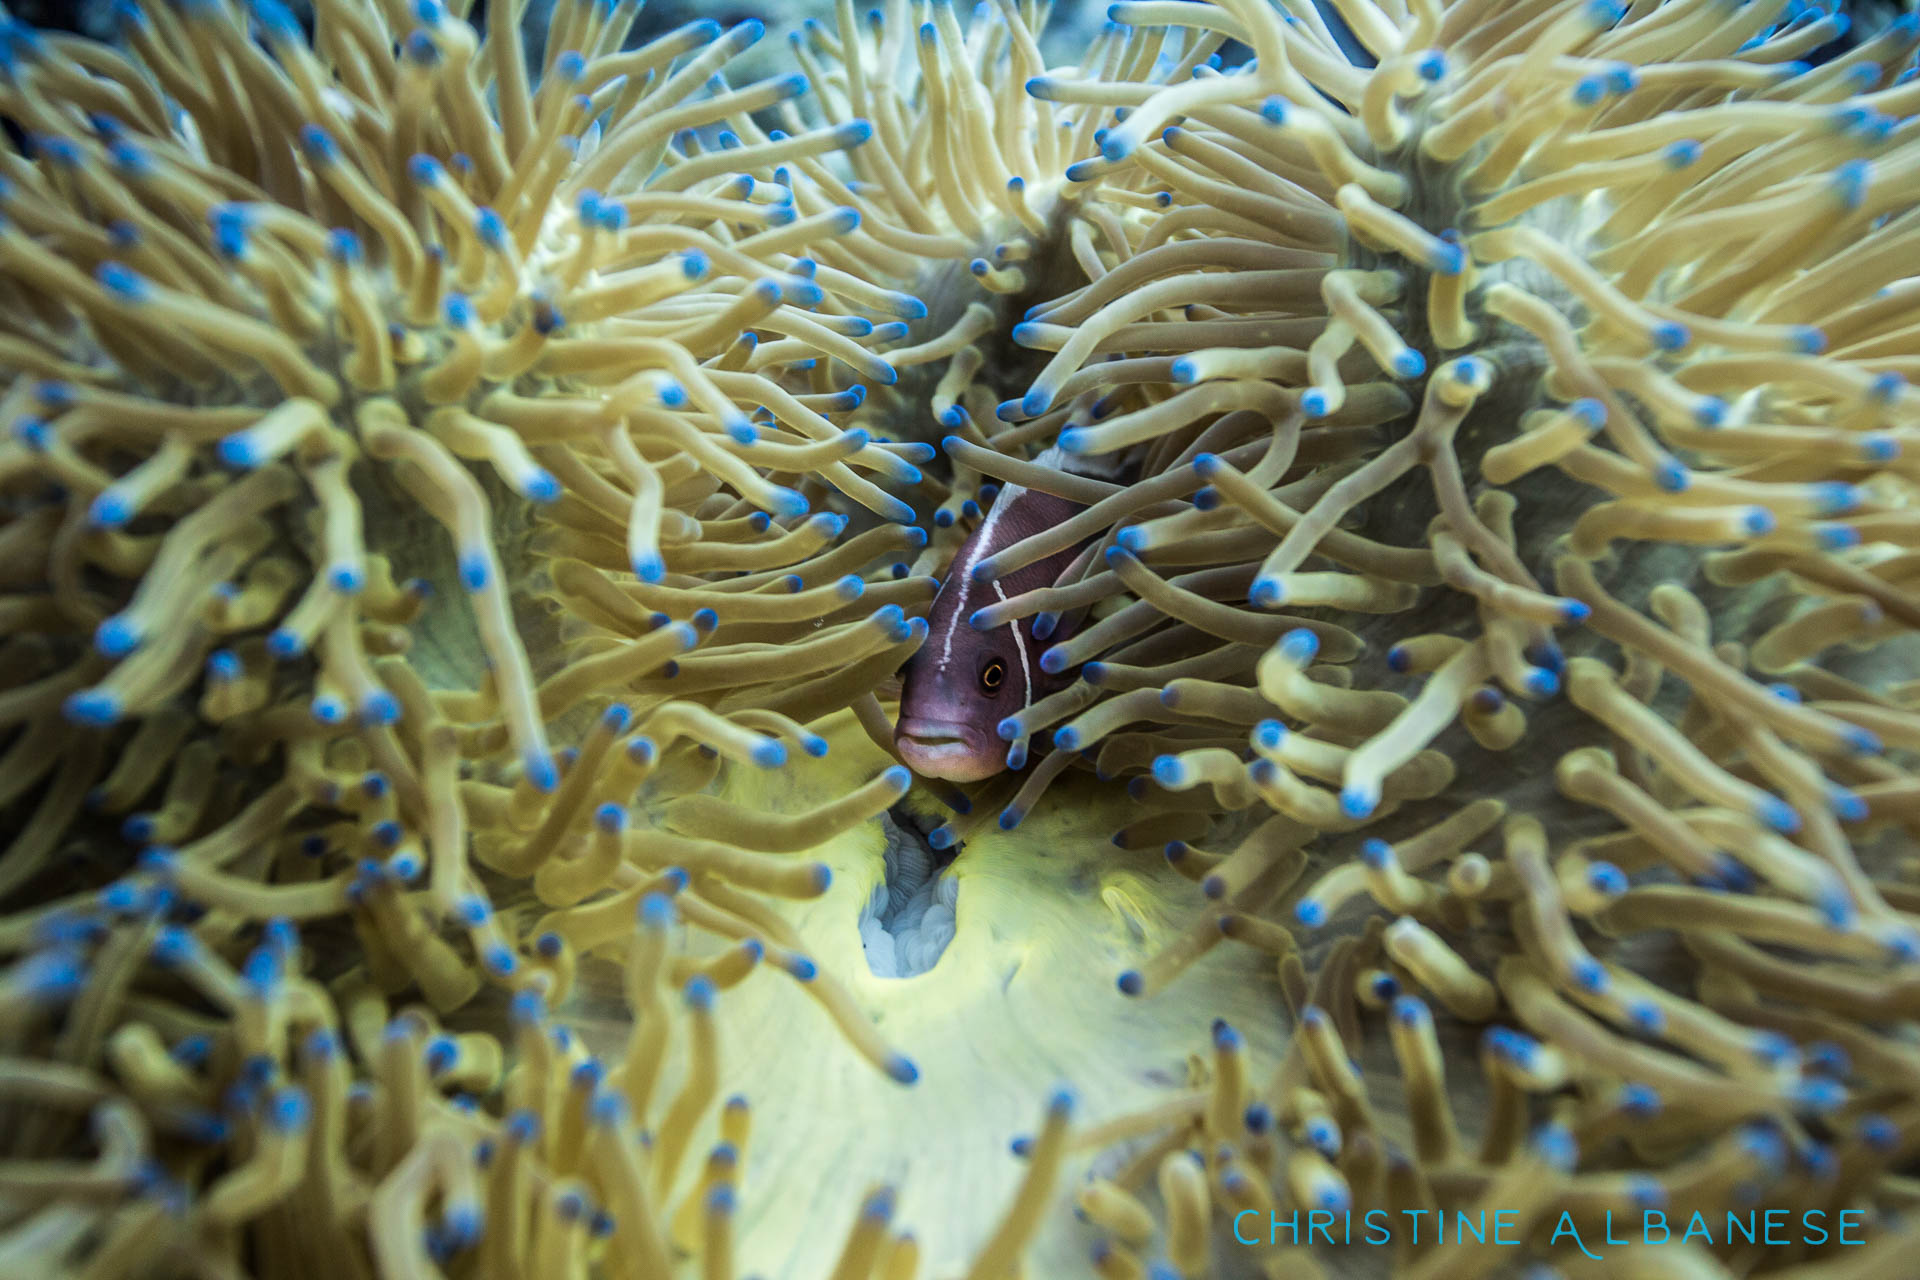 Playing Peek-a-Boo with a skunk anemone fish :)